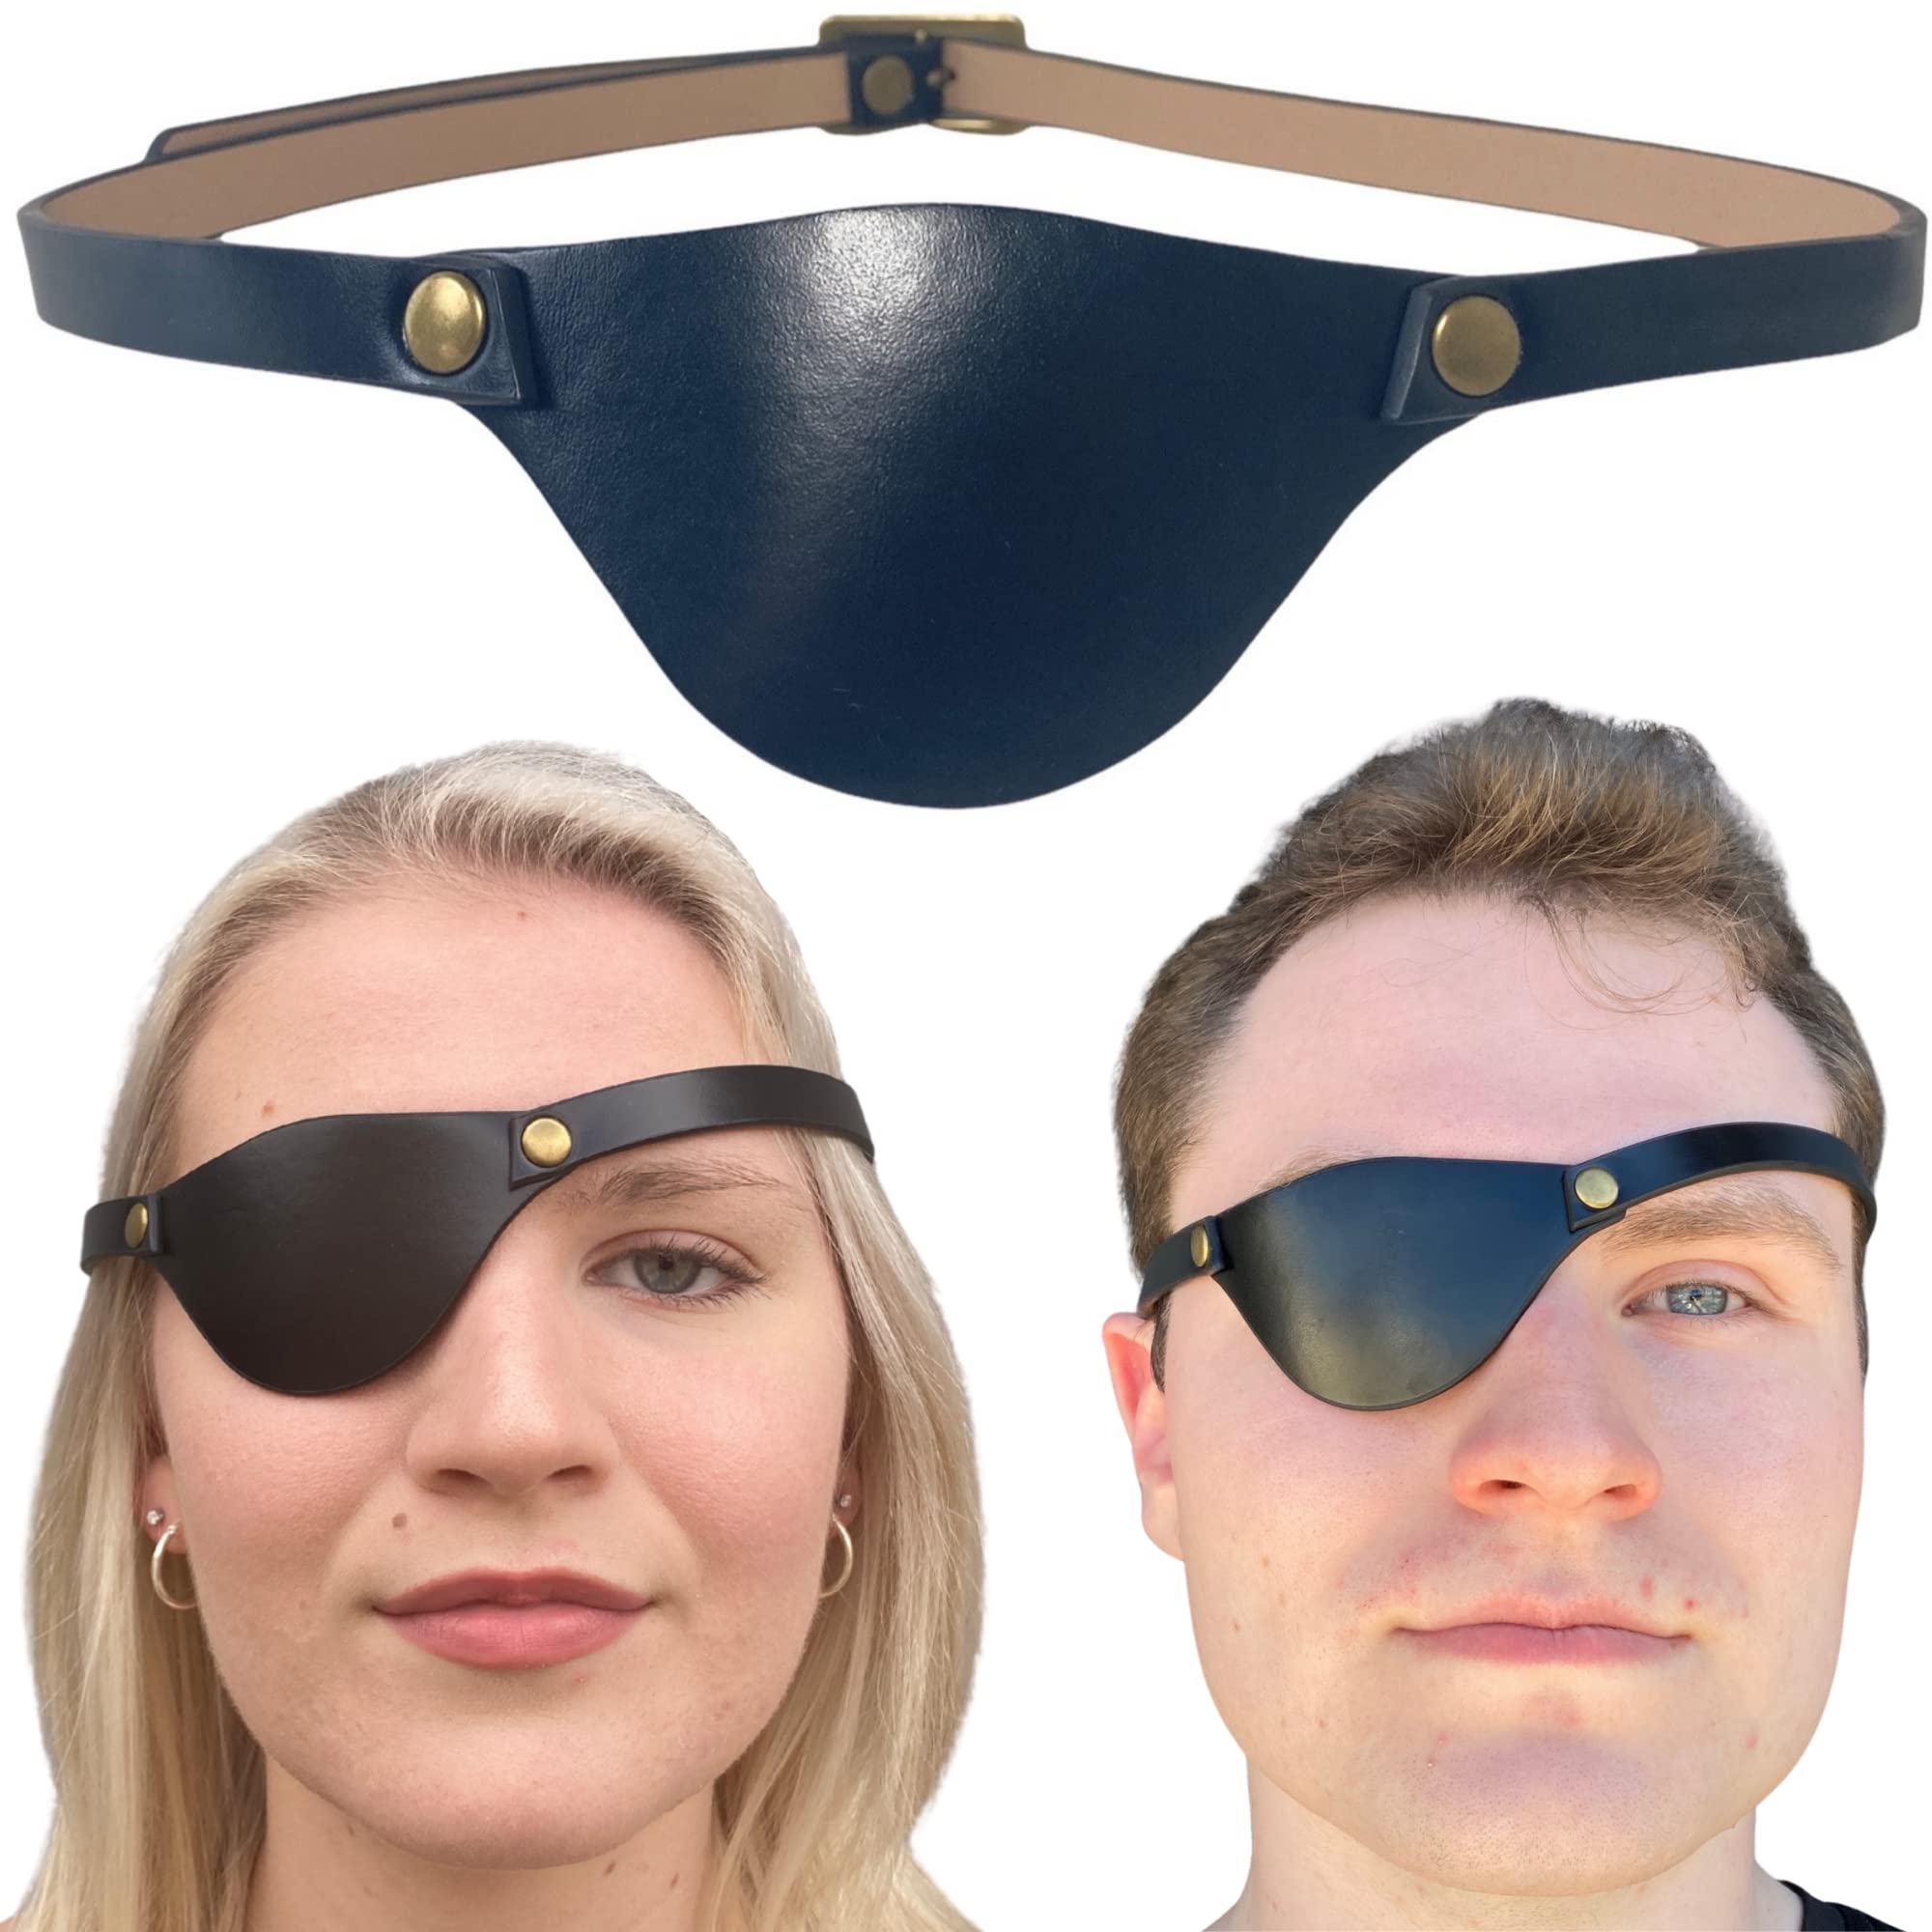  Andean Leather - Leather Eye Patch, Eye Patches for Adults,  Pirate Eye Patch, Medical Eye Patch for Right and Left Eye : Andean  Leather: Health & Household